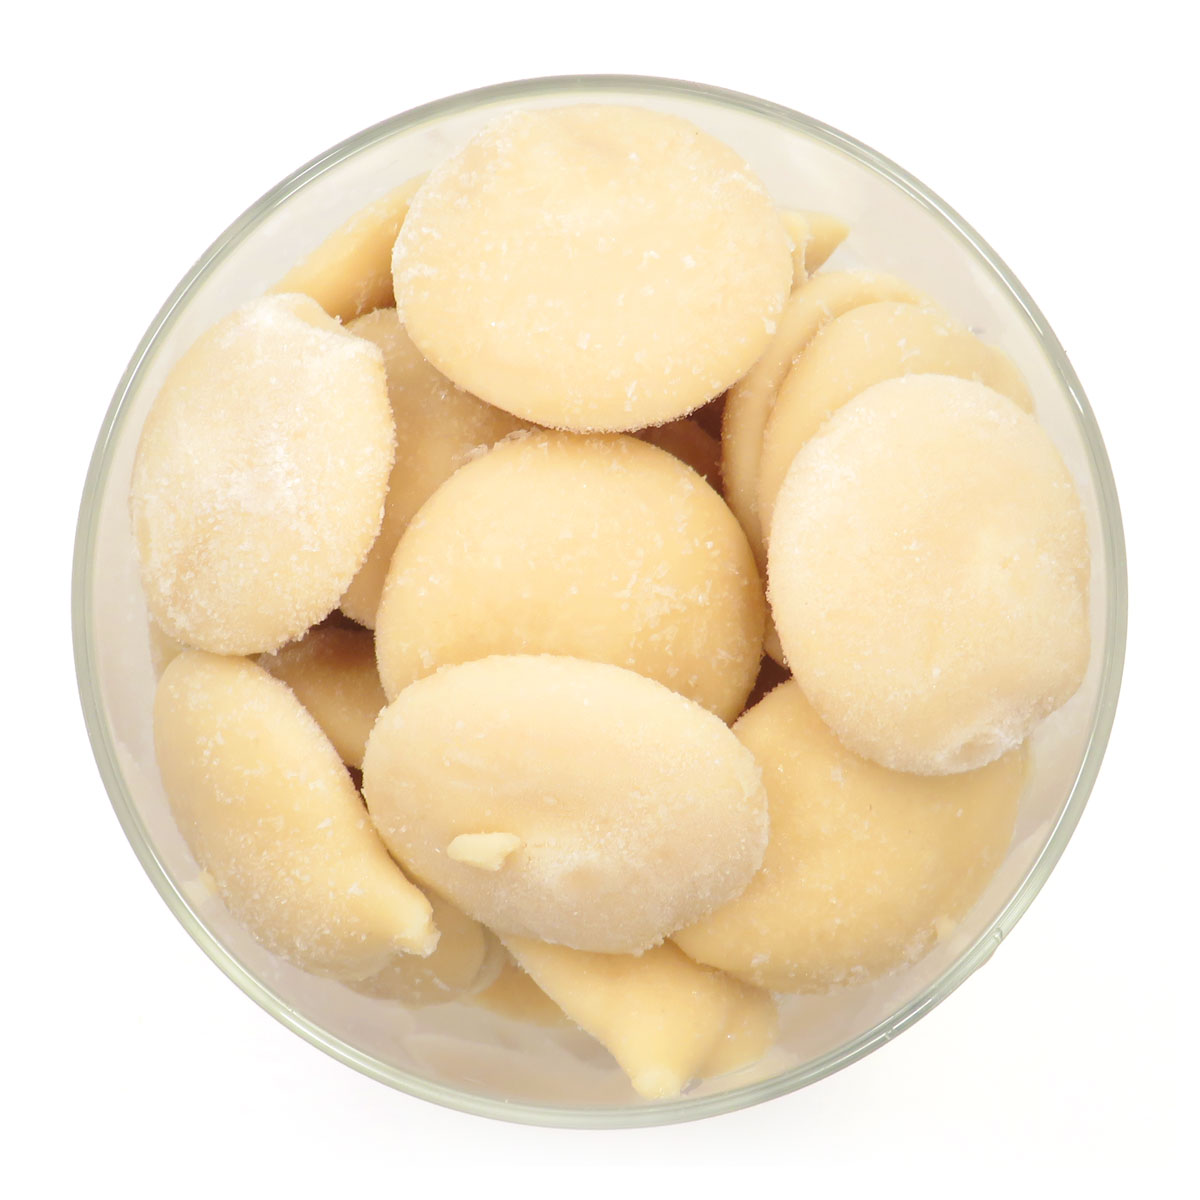 Banana puree in iqf pellets. Supplier